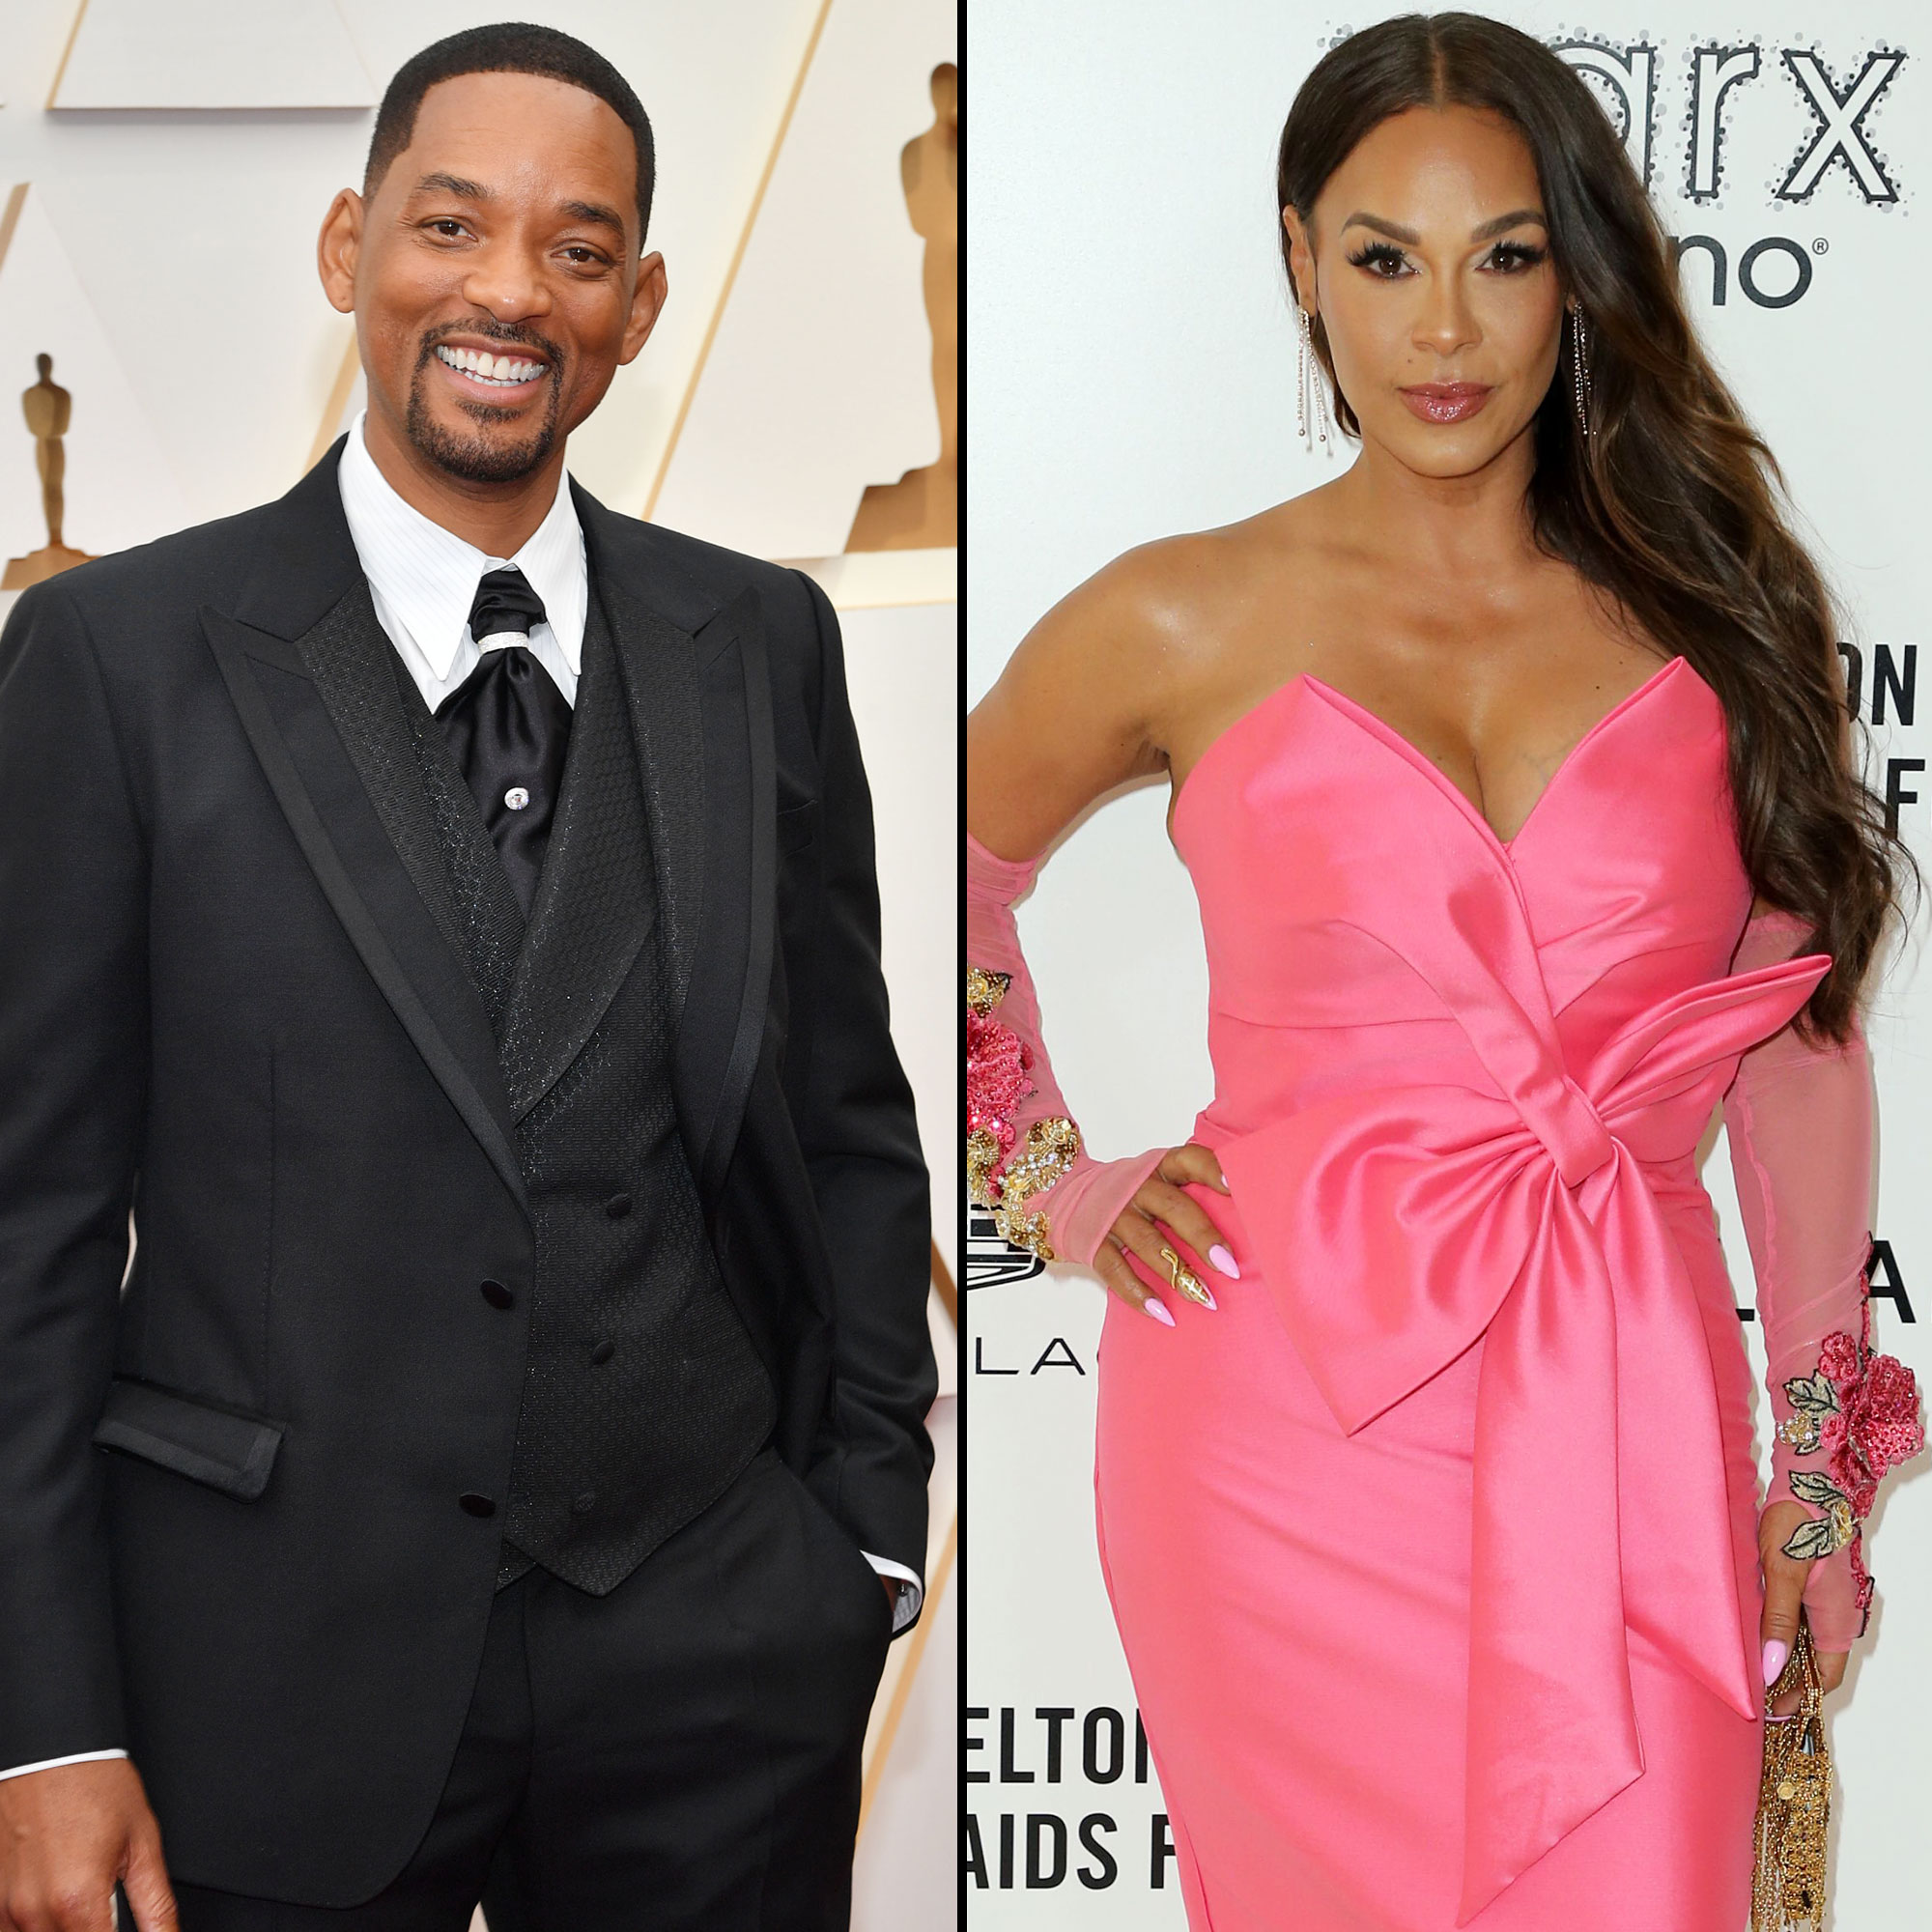 Will Smith Reunites With Ex-Wife Sheree Zampino After Oscars 2022 pic